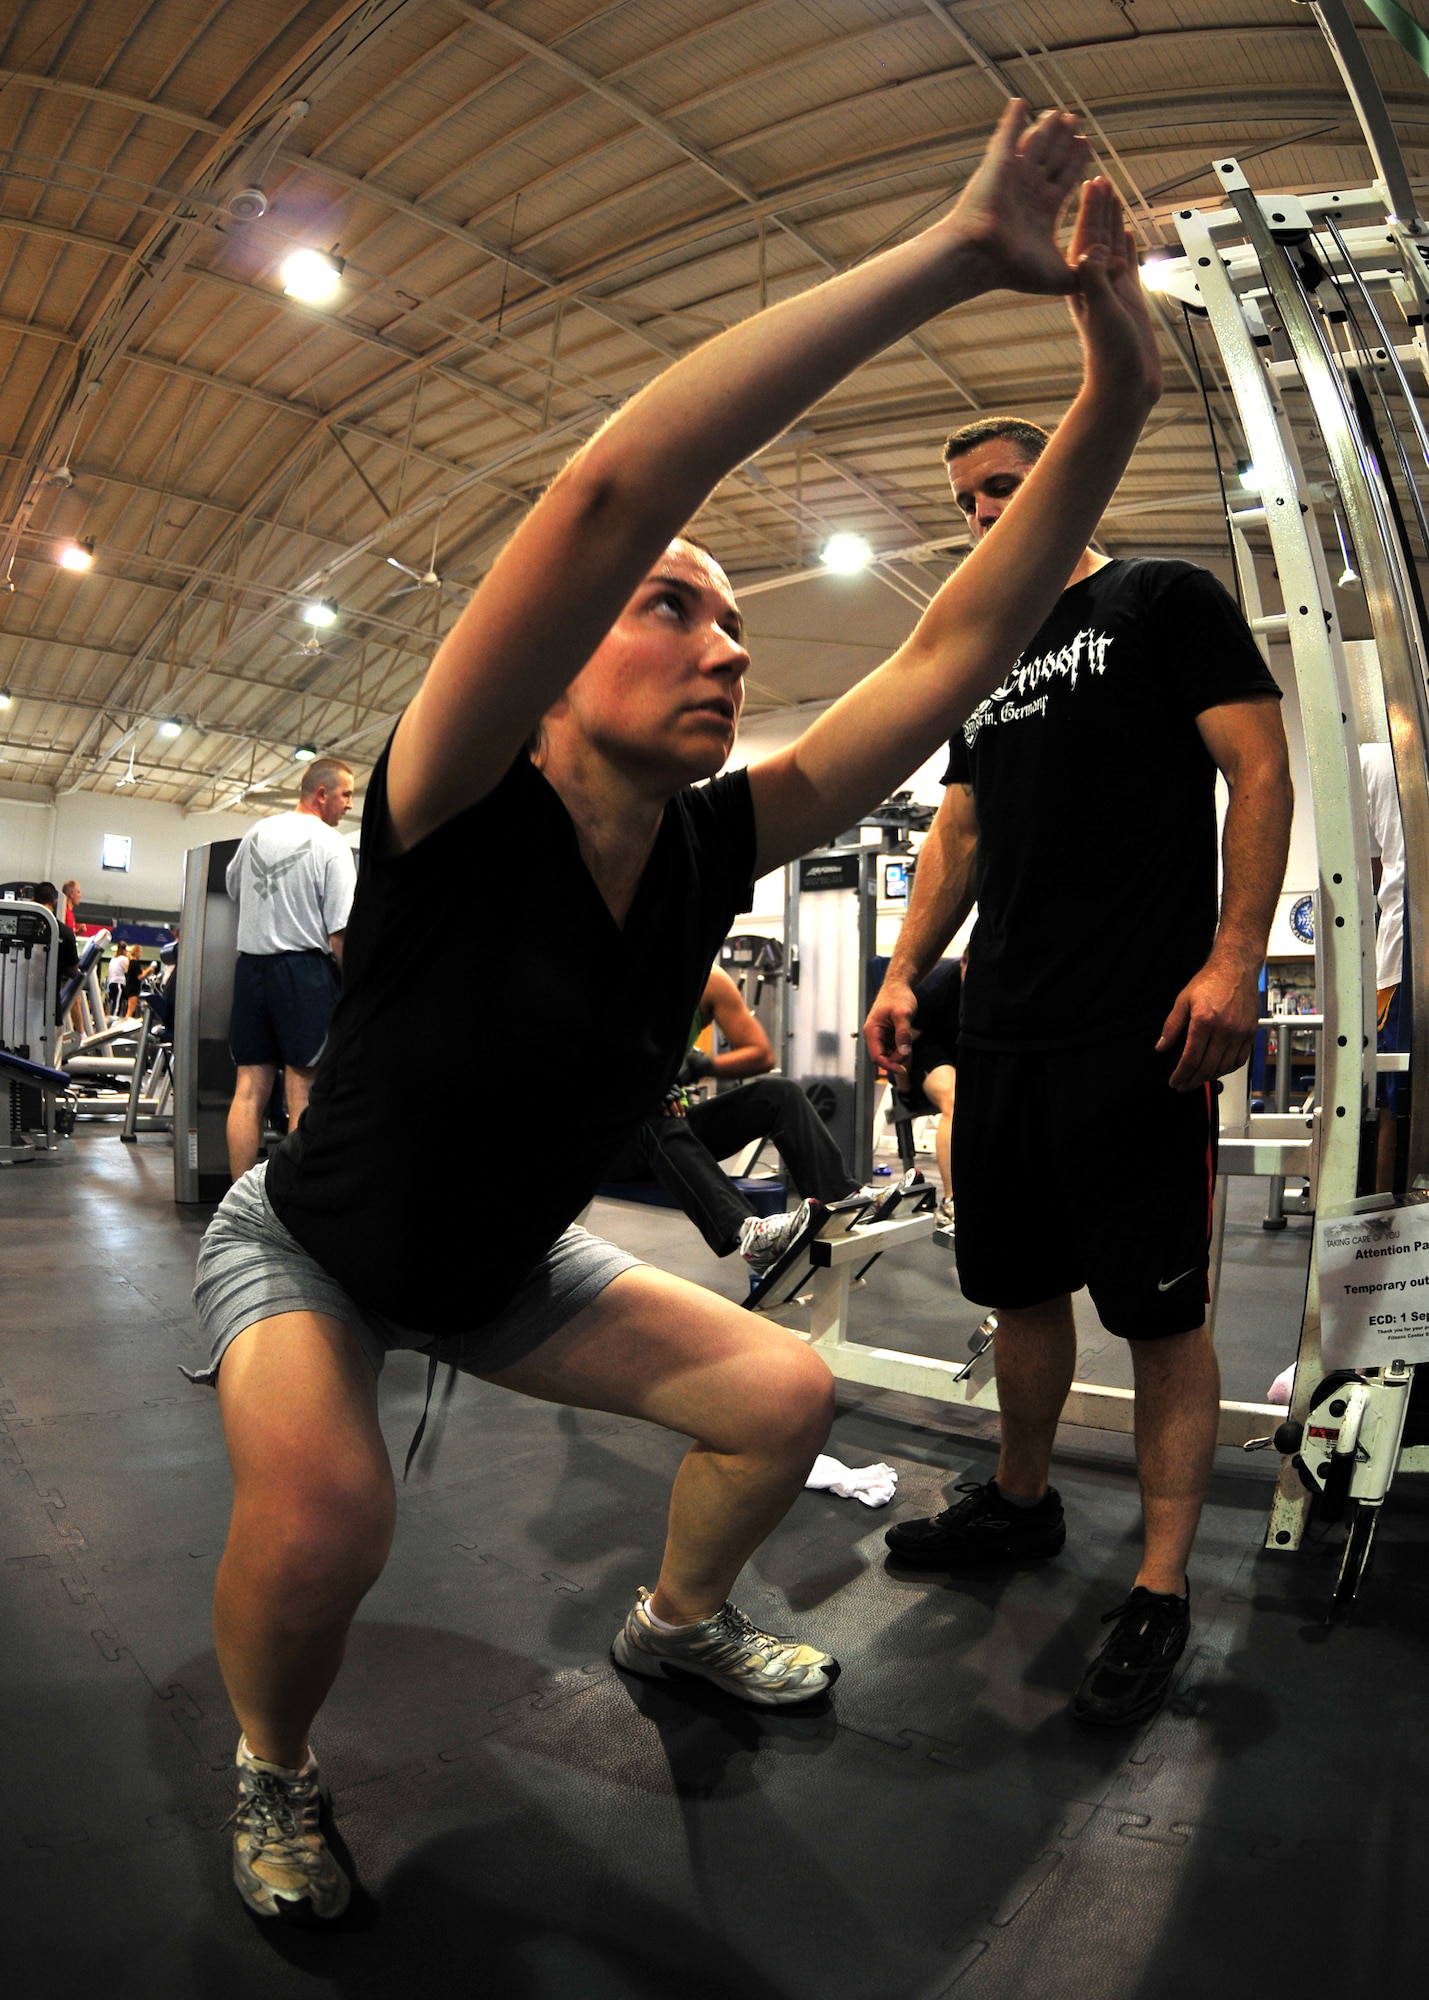 Kirsten Steward, a speech language pathologist at the Ramstein Elementary School, performs squats as part of her CrossFit workout of the day at the Ramstein Air Base North Side Gym, Aug. 28, 2009. (U.S. Air Force photo by Staff Sgt. Markus Maier)